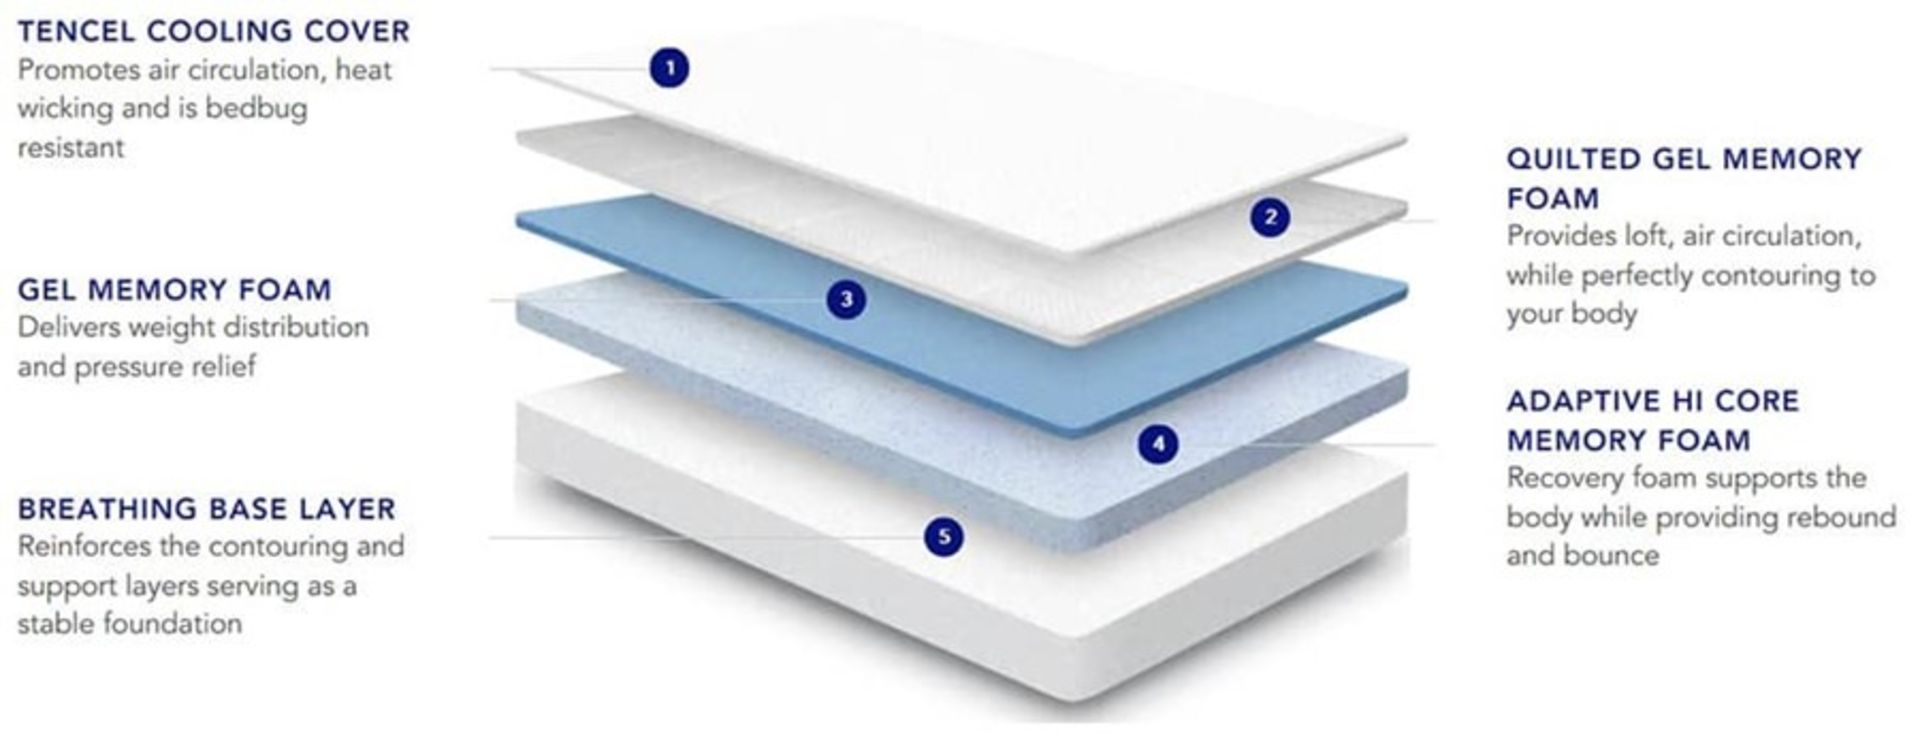 Nectar Professionally Refurbished Smart Pressure Relieving King size Memory Foam Mattress, This - Image 2 of 2